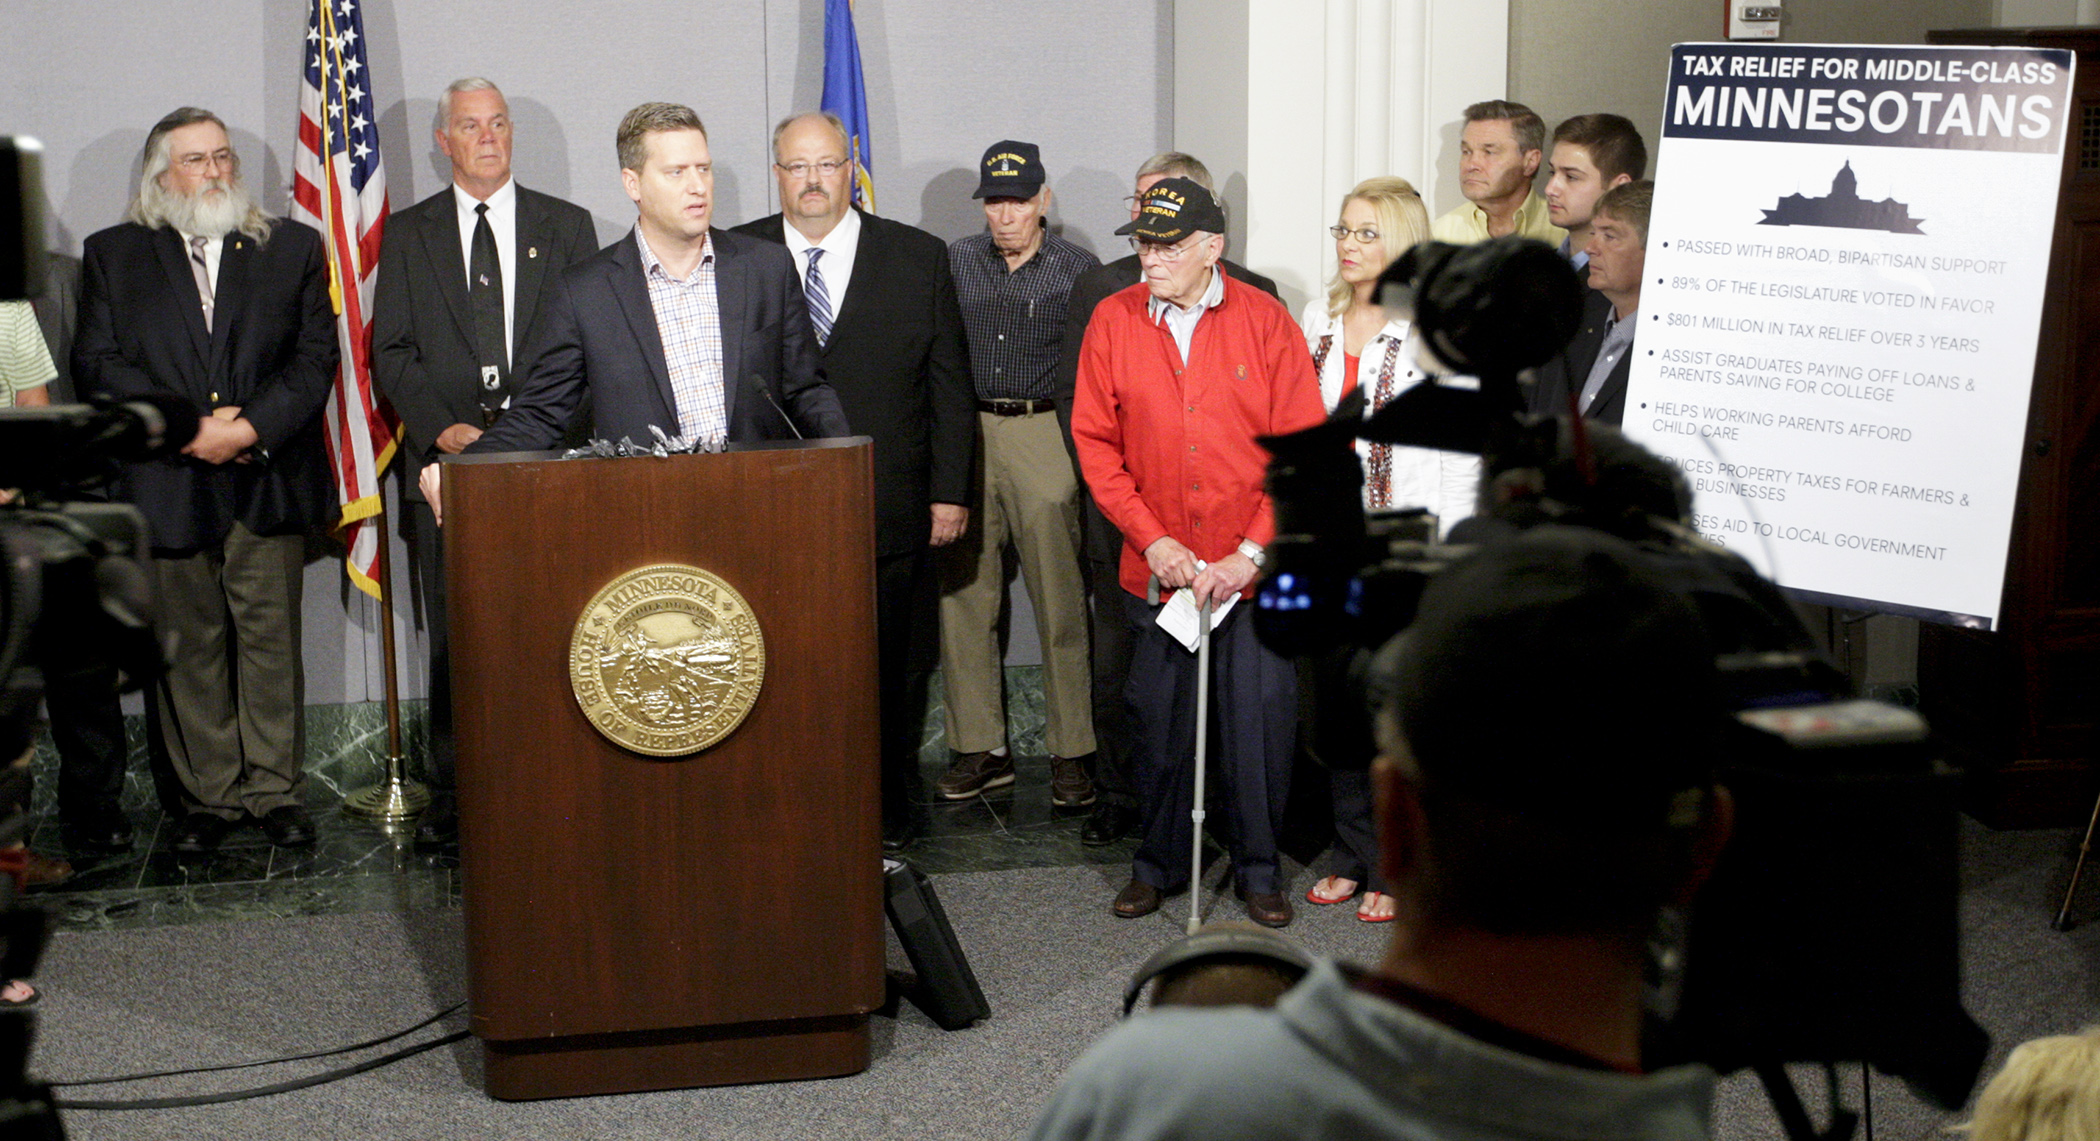 Flanked by House Republicans and citizens that include veterans, farmers and college students, House Speaker Kurt Daudt urges Gov. Mark Dayton to sign the omnibus tax bill. Photo by Paul Battaglia